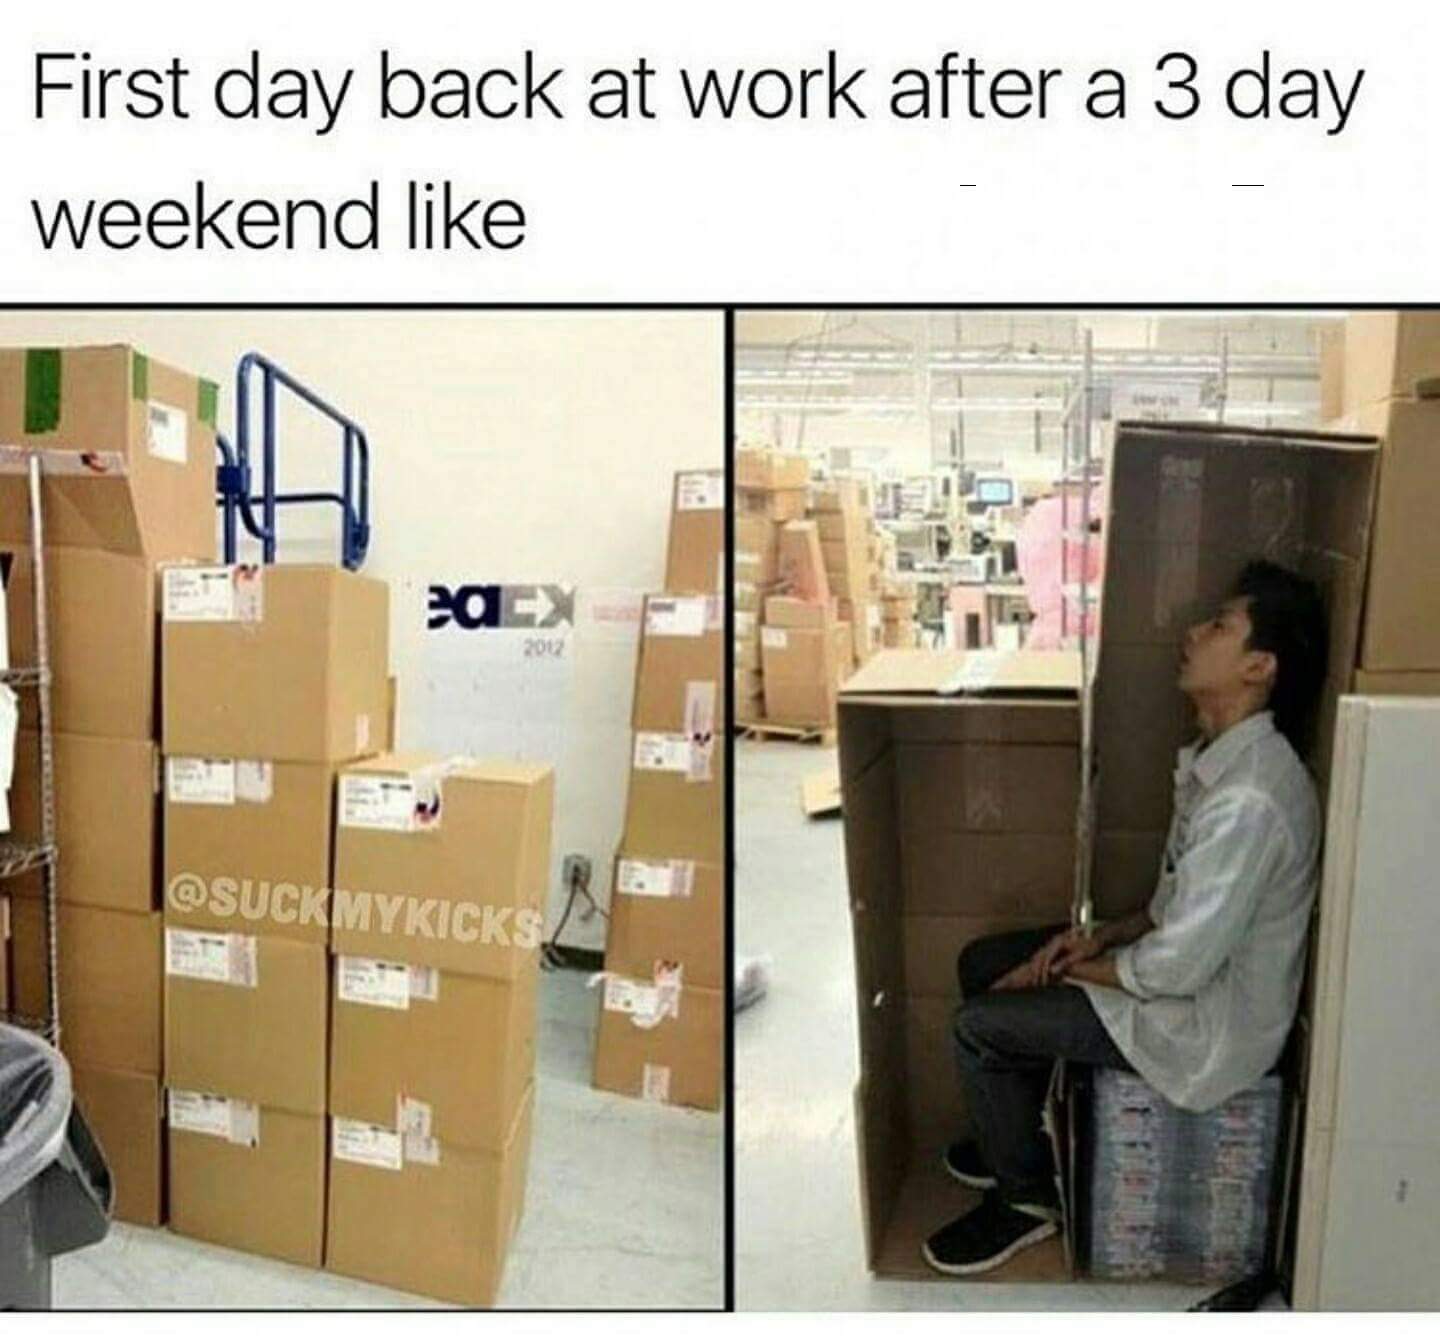 amazing picture of hiding in boxes at work - First day back at work after a 3 day weekend 20